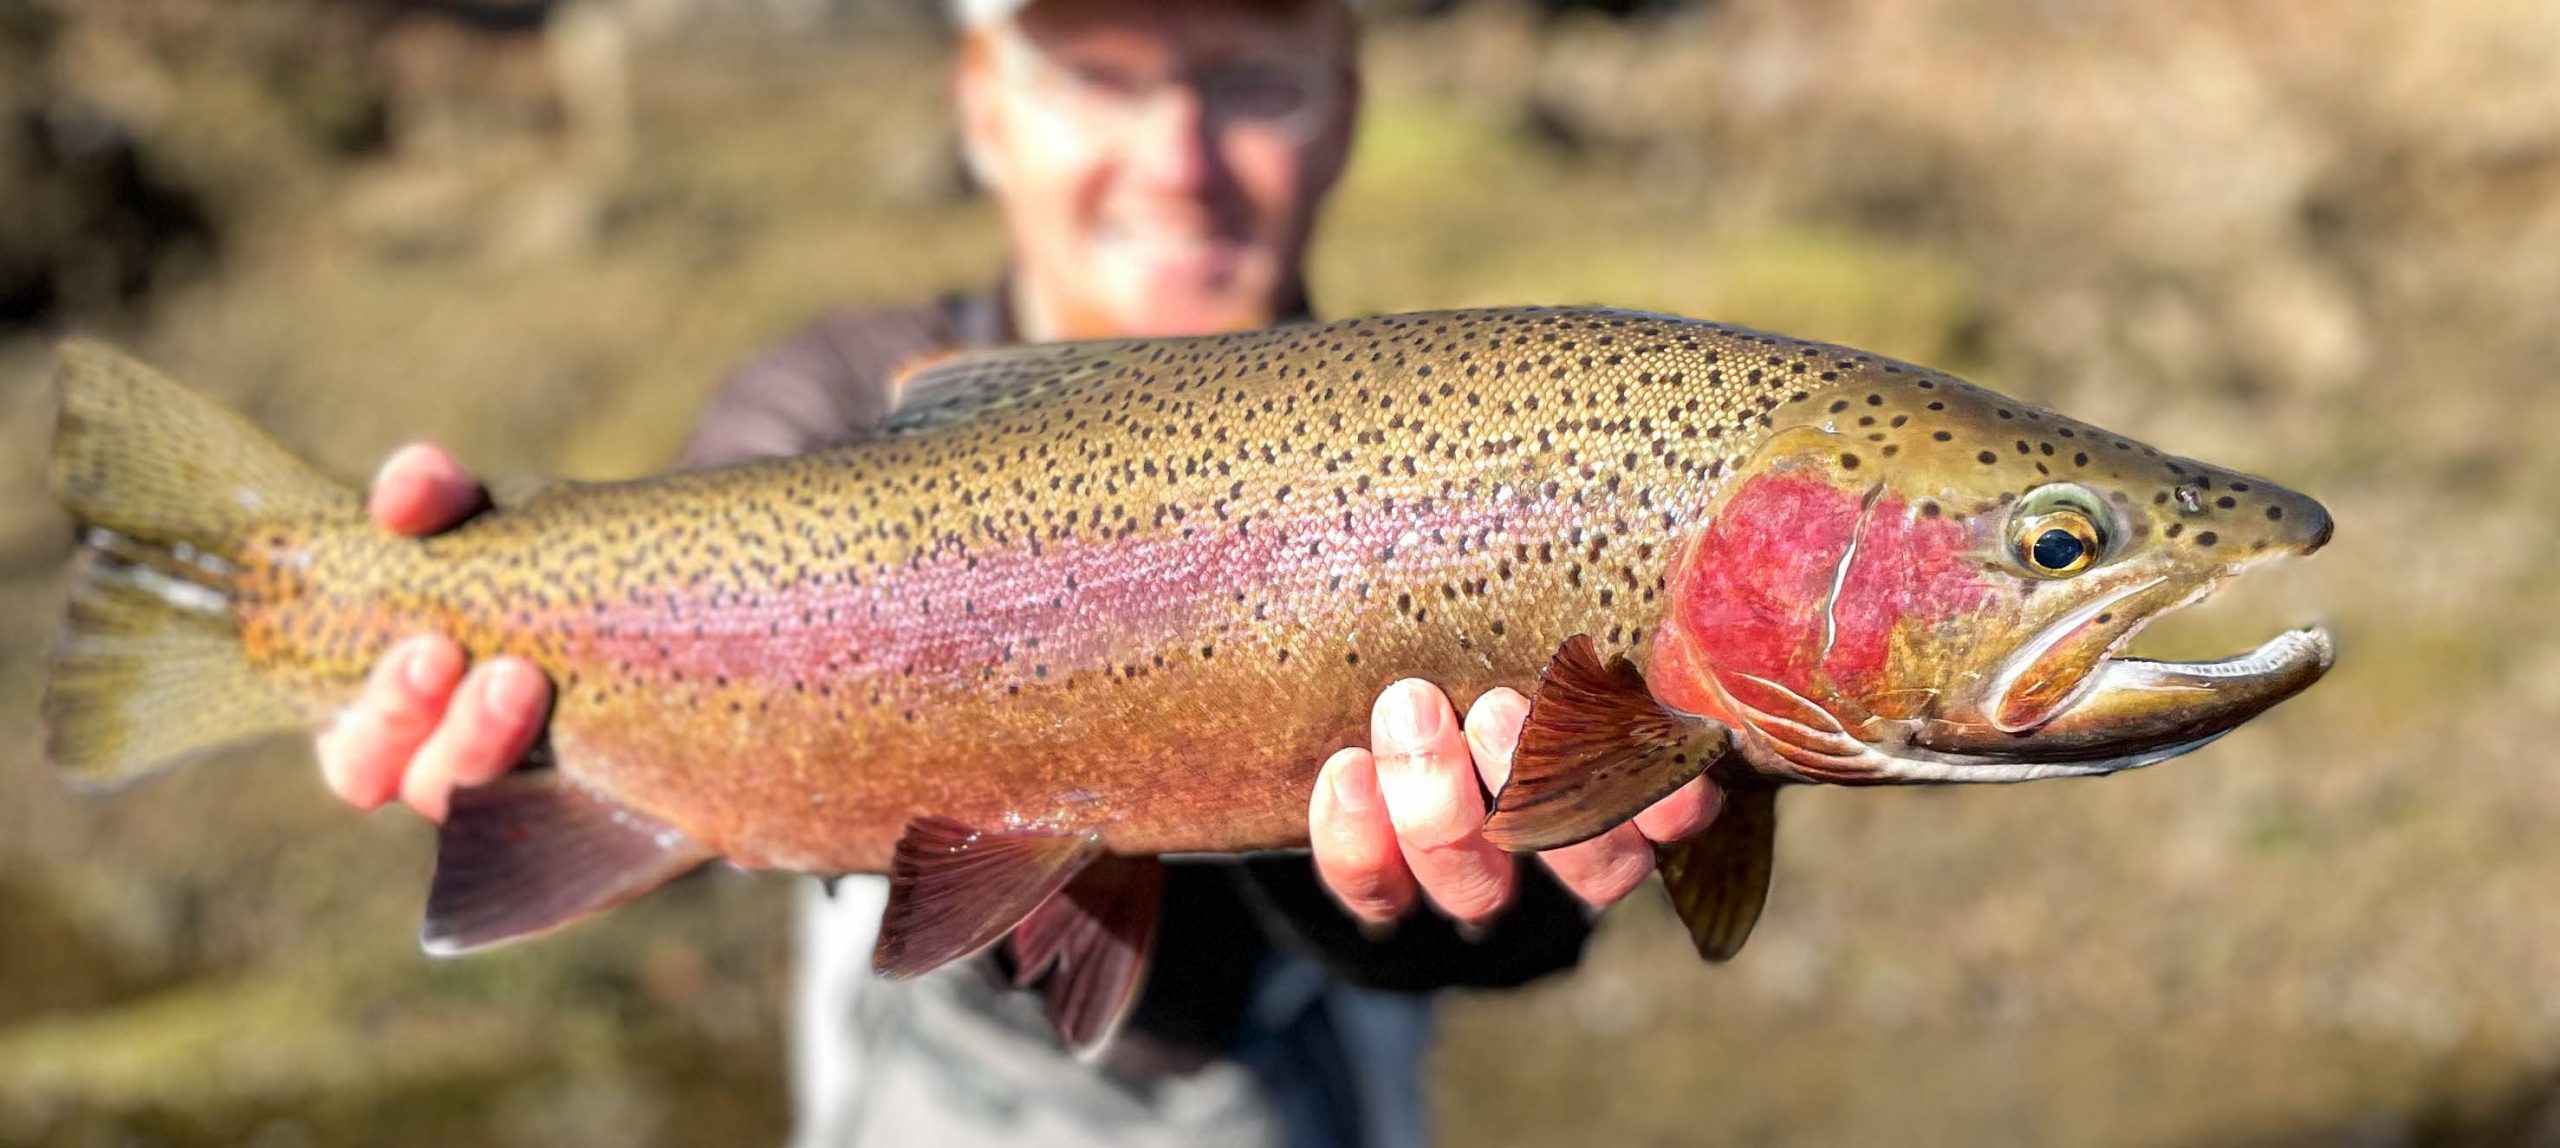 Fishing Report for January 26, 2021